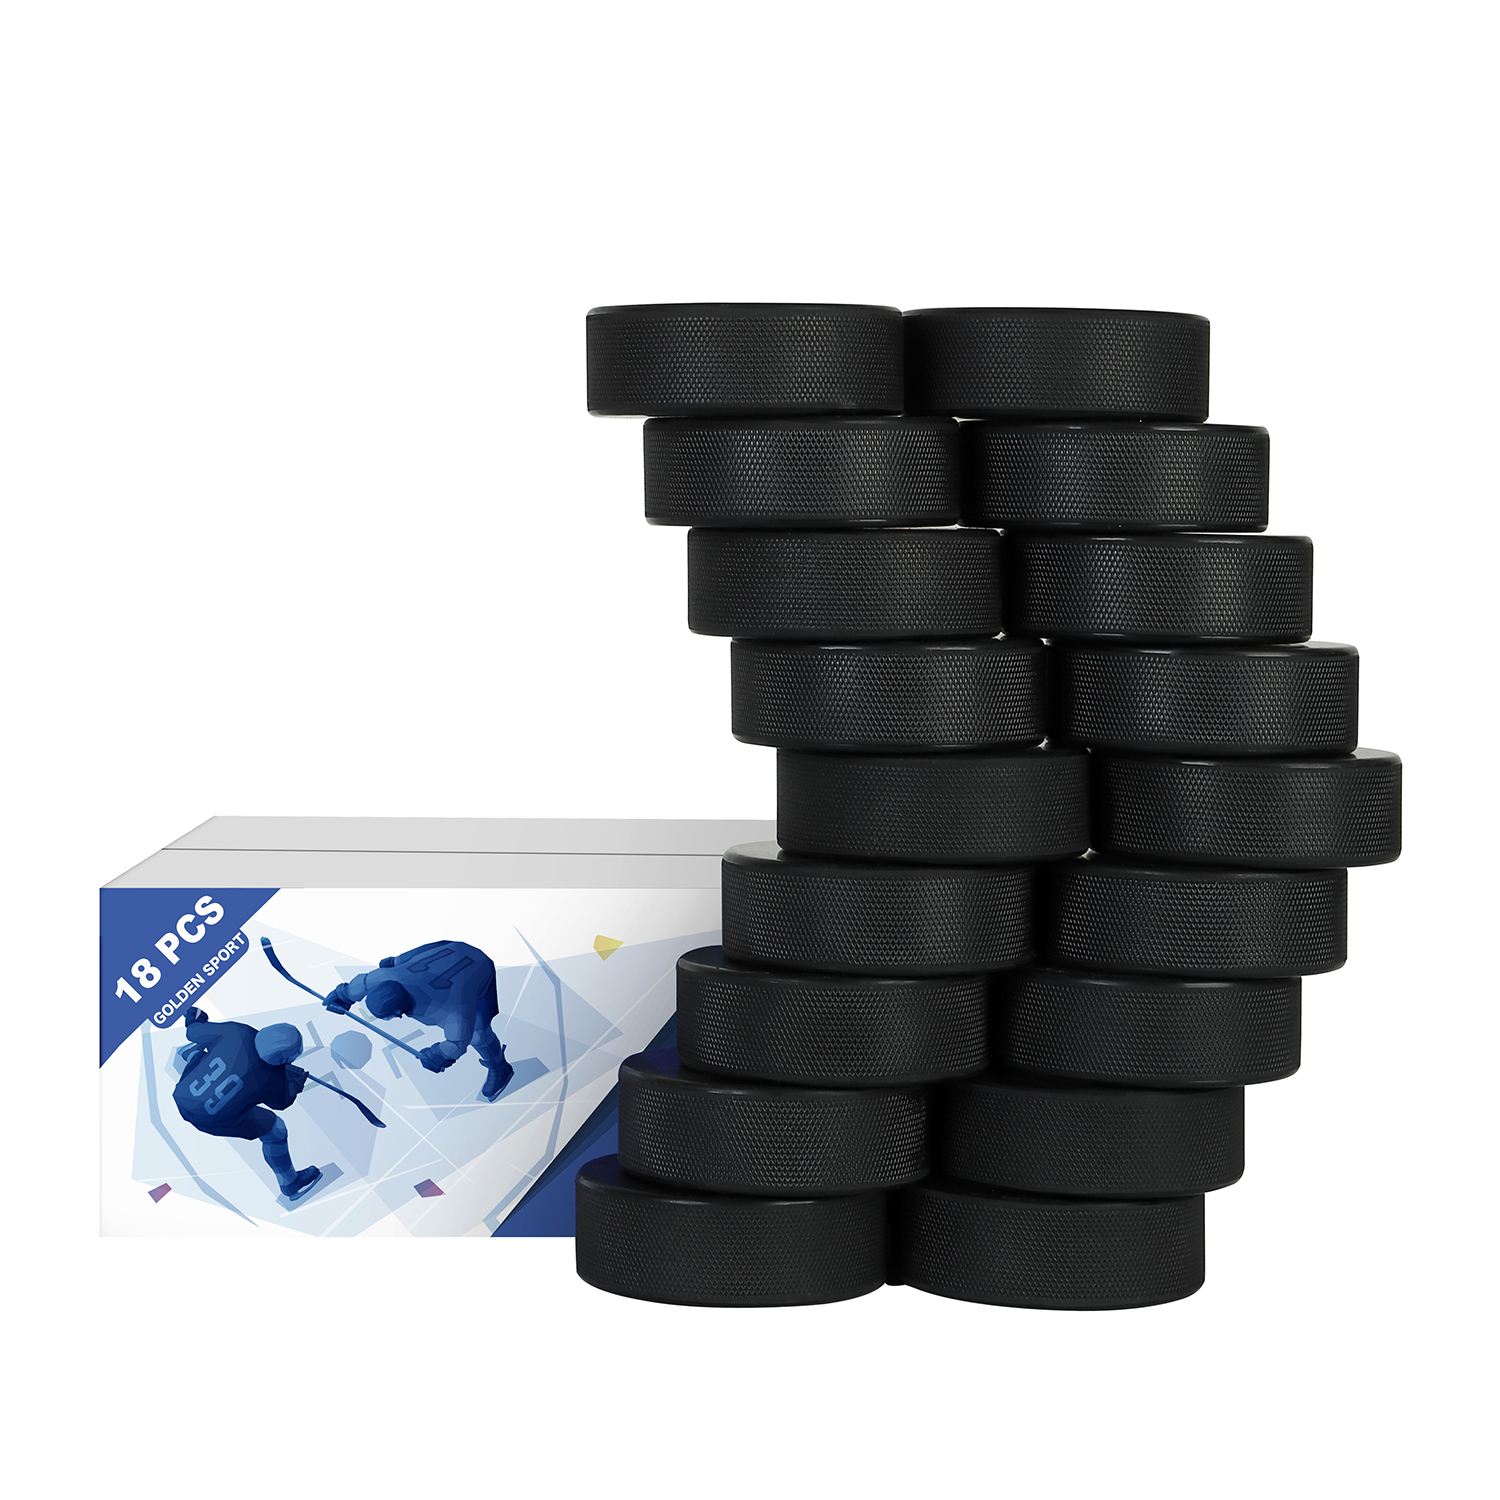 Thickness 1 Diameter 3 Golden Sport Ice Hockey Pucks Official Regulation for Practicing and Classic Training 5pcs 6oz Black 